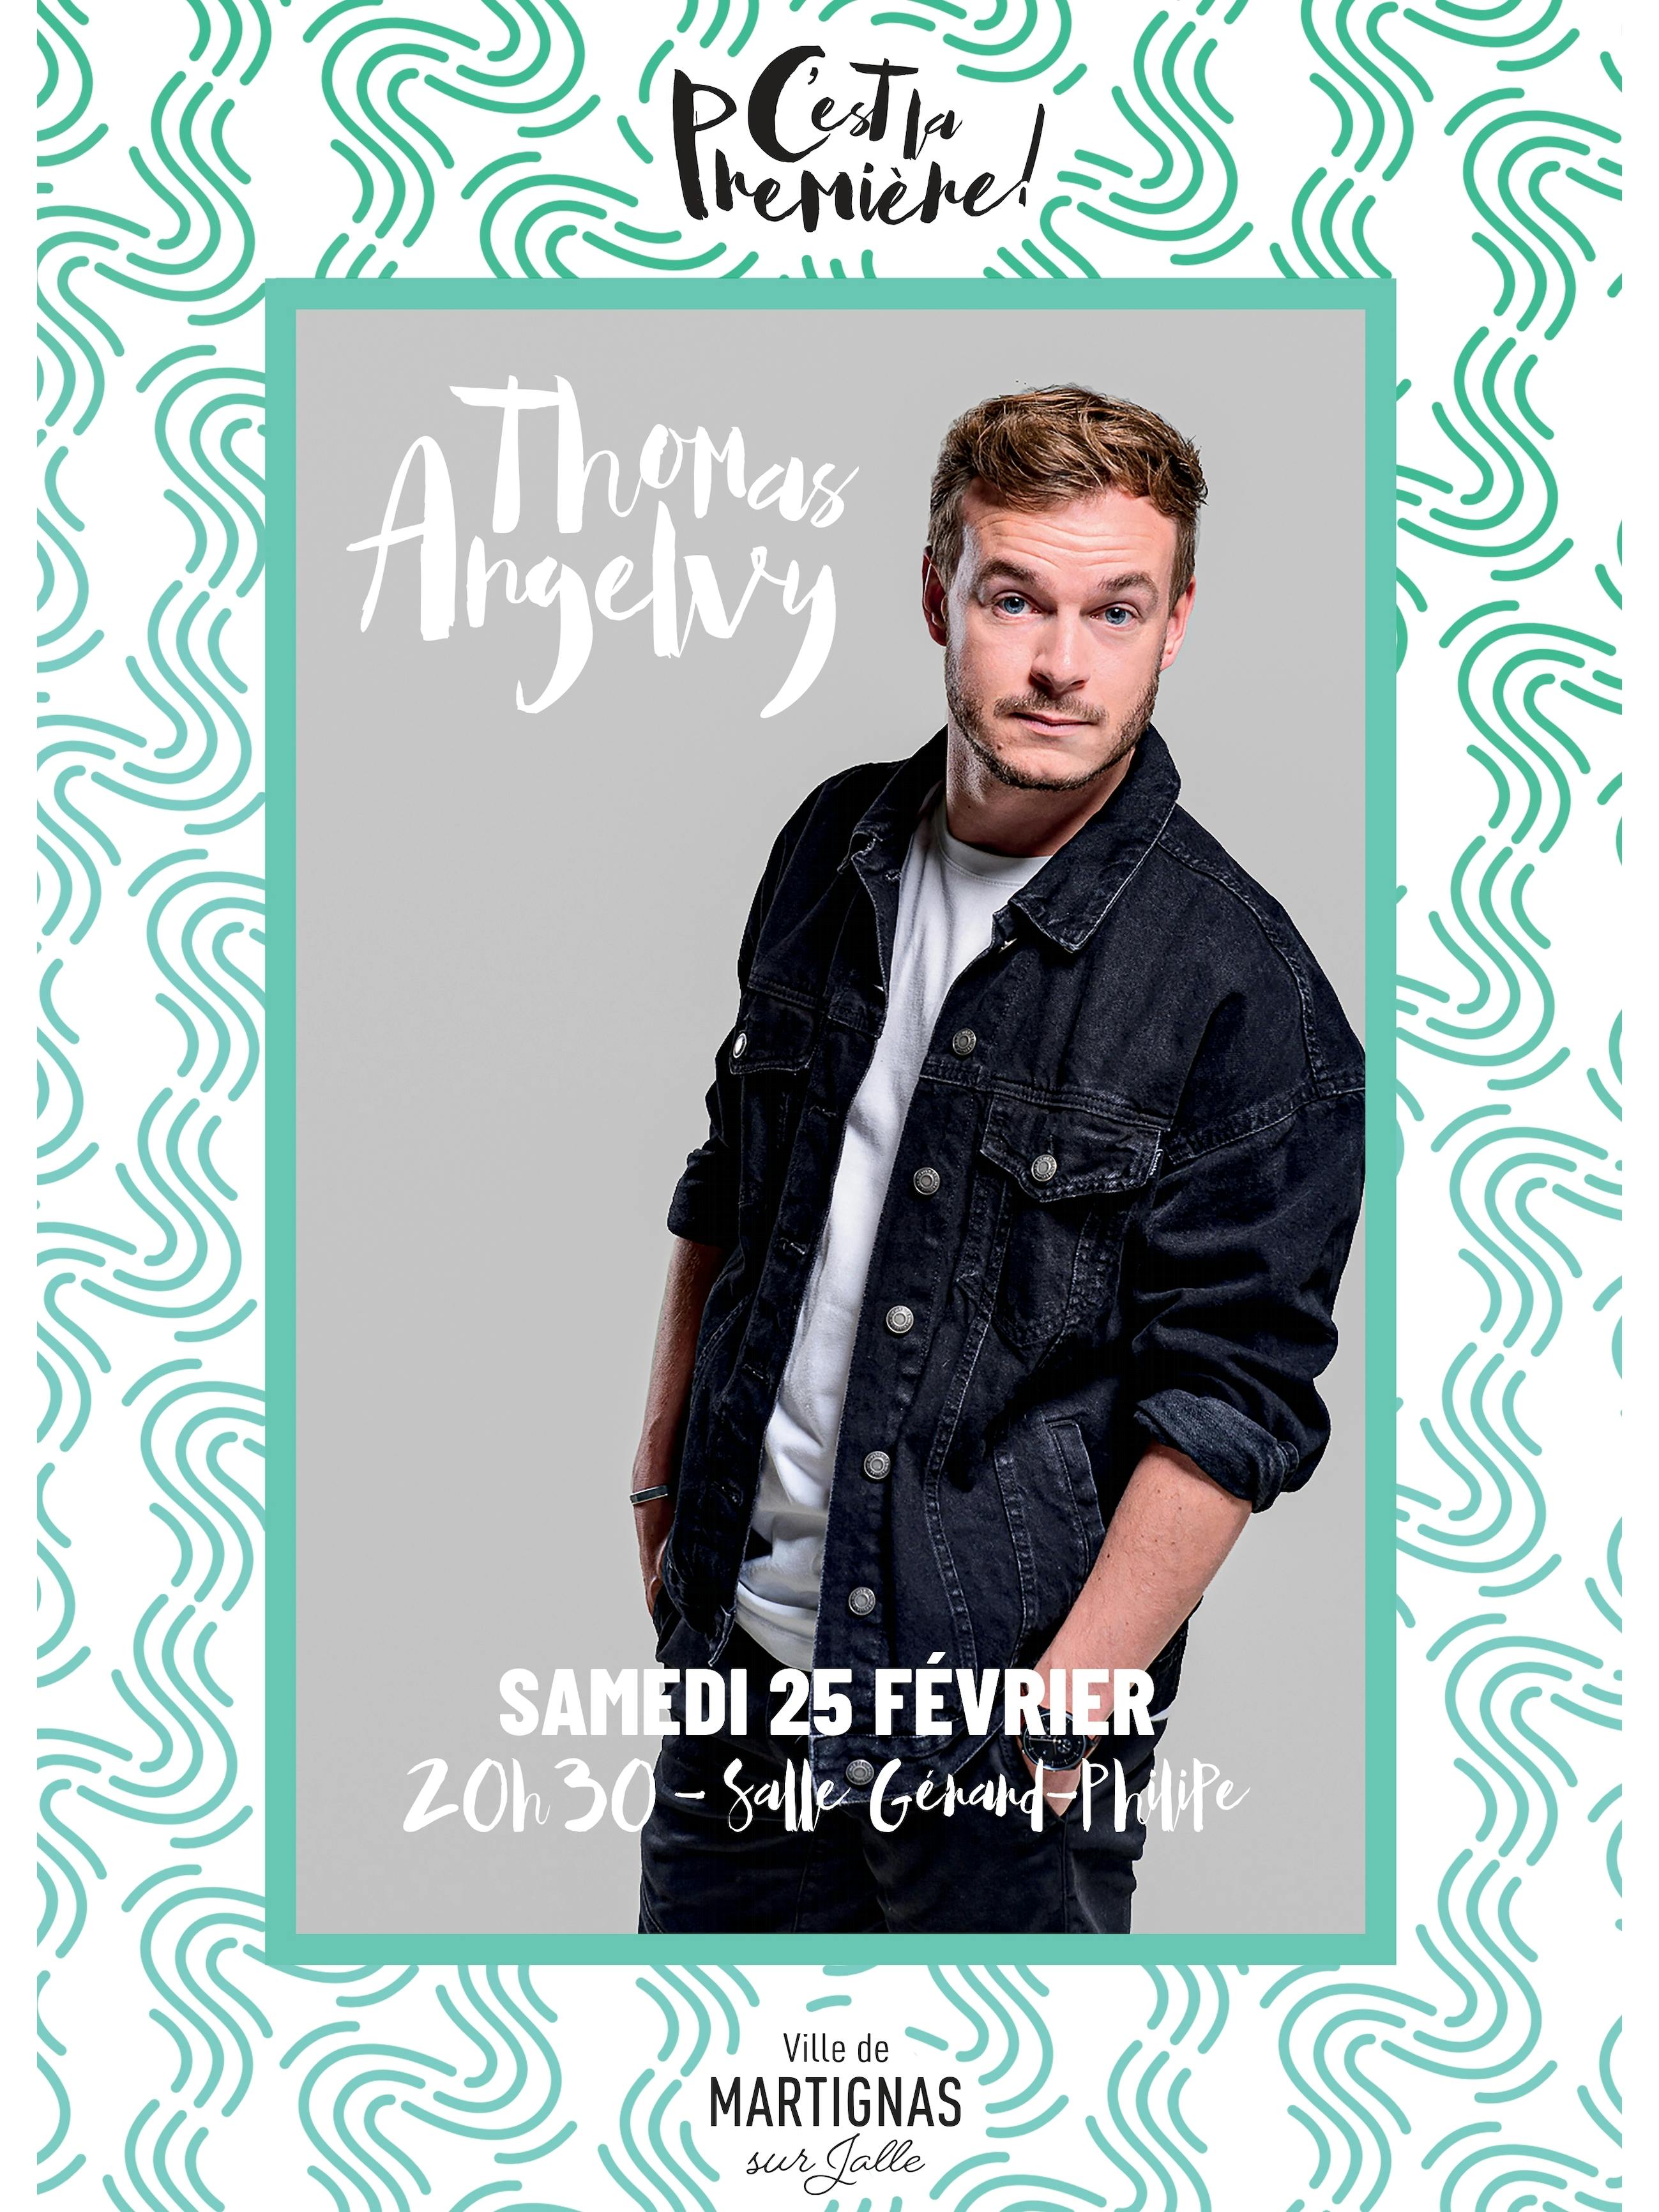 THOMAS ANGELVY - COMPLET!